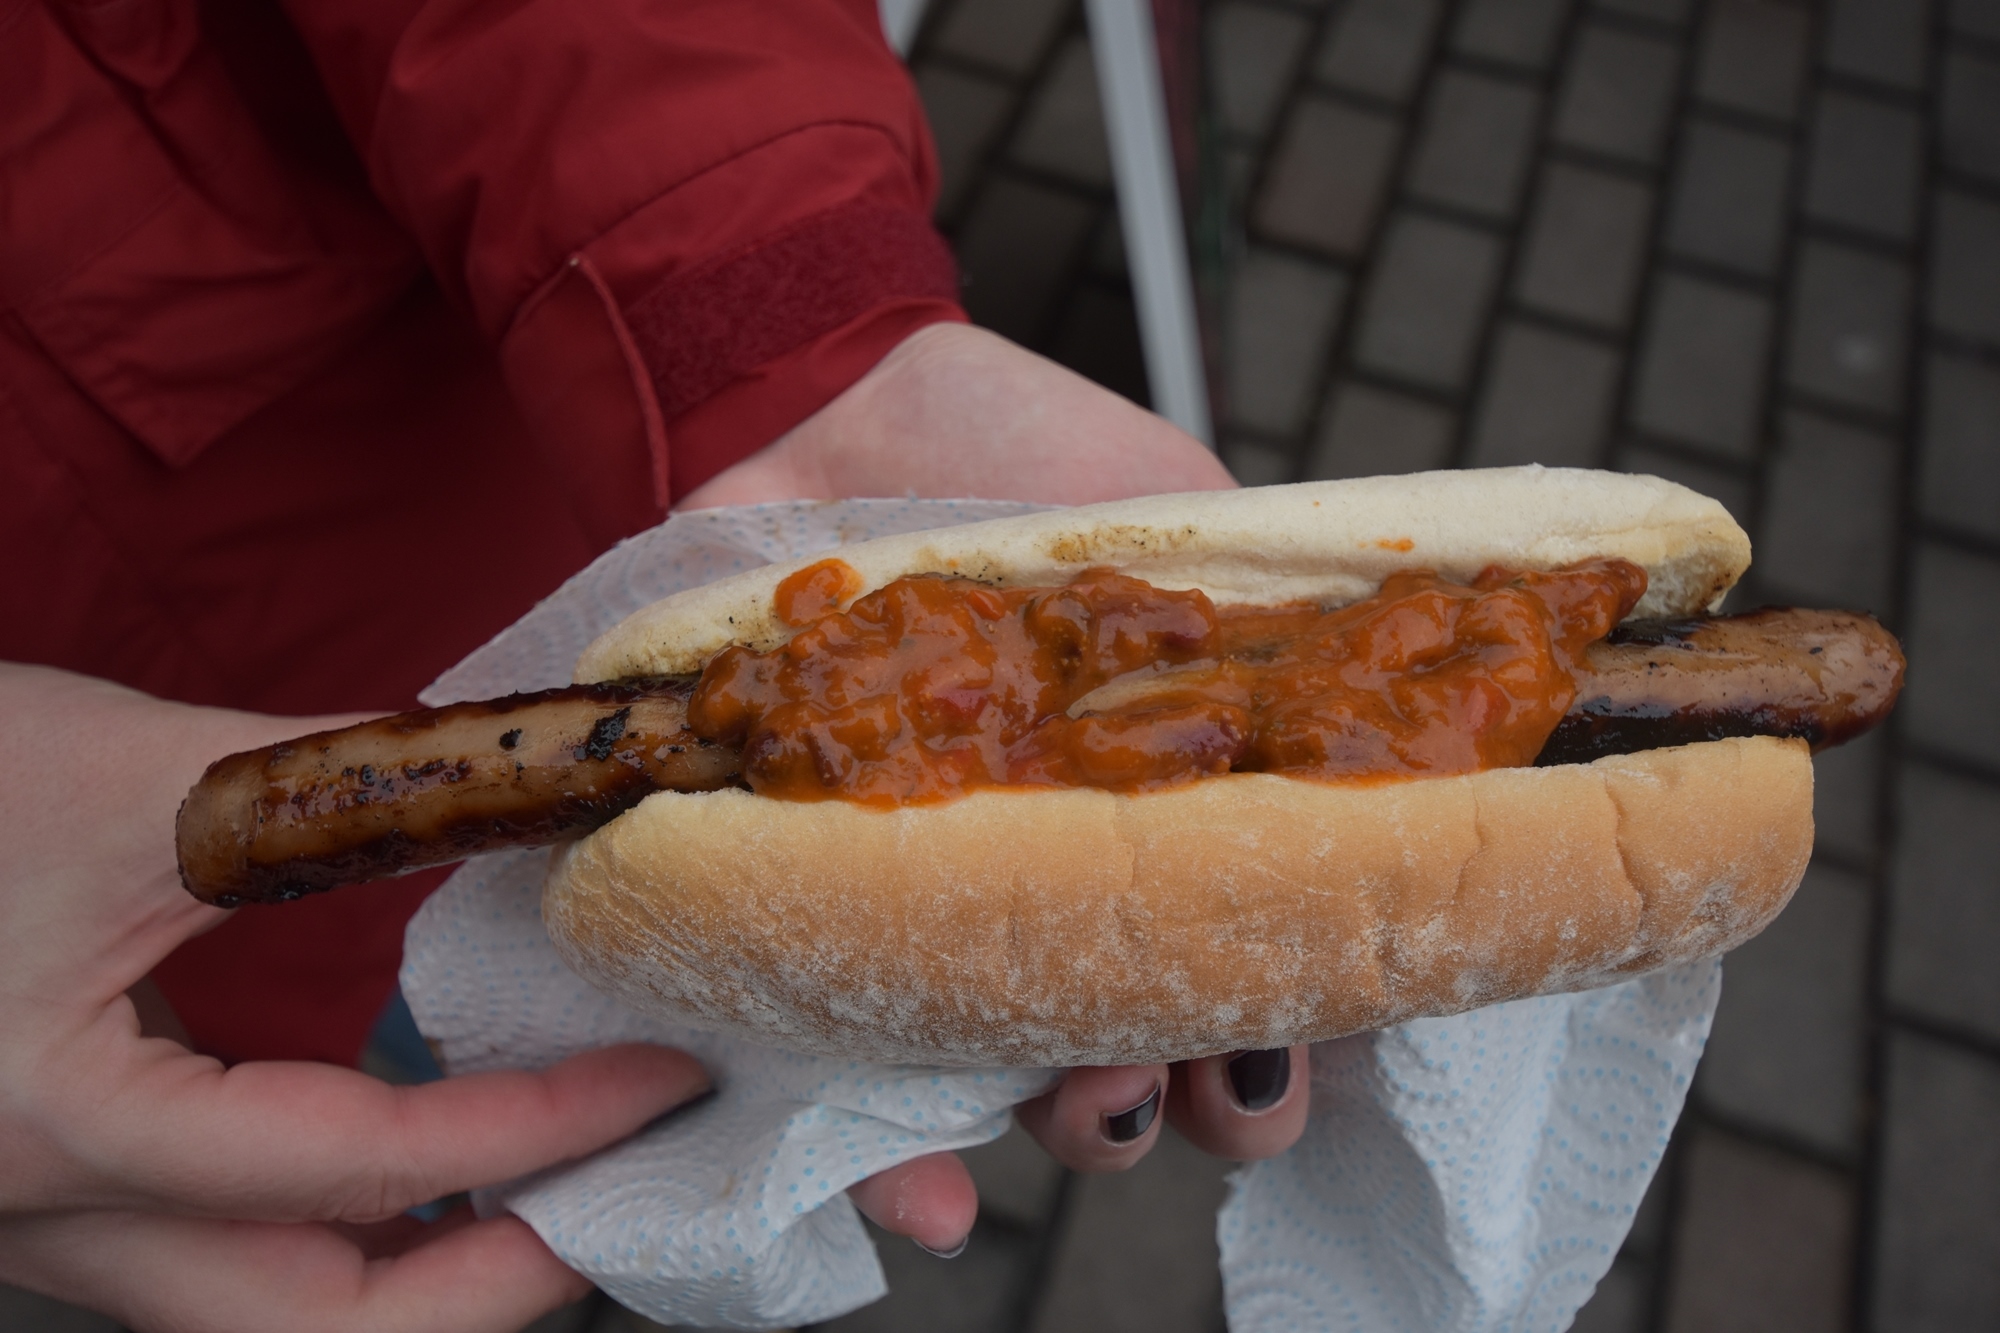 Cumberland sausage with marmalade at the annual Penrith Marmalade Festival